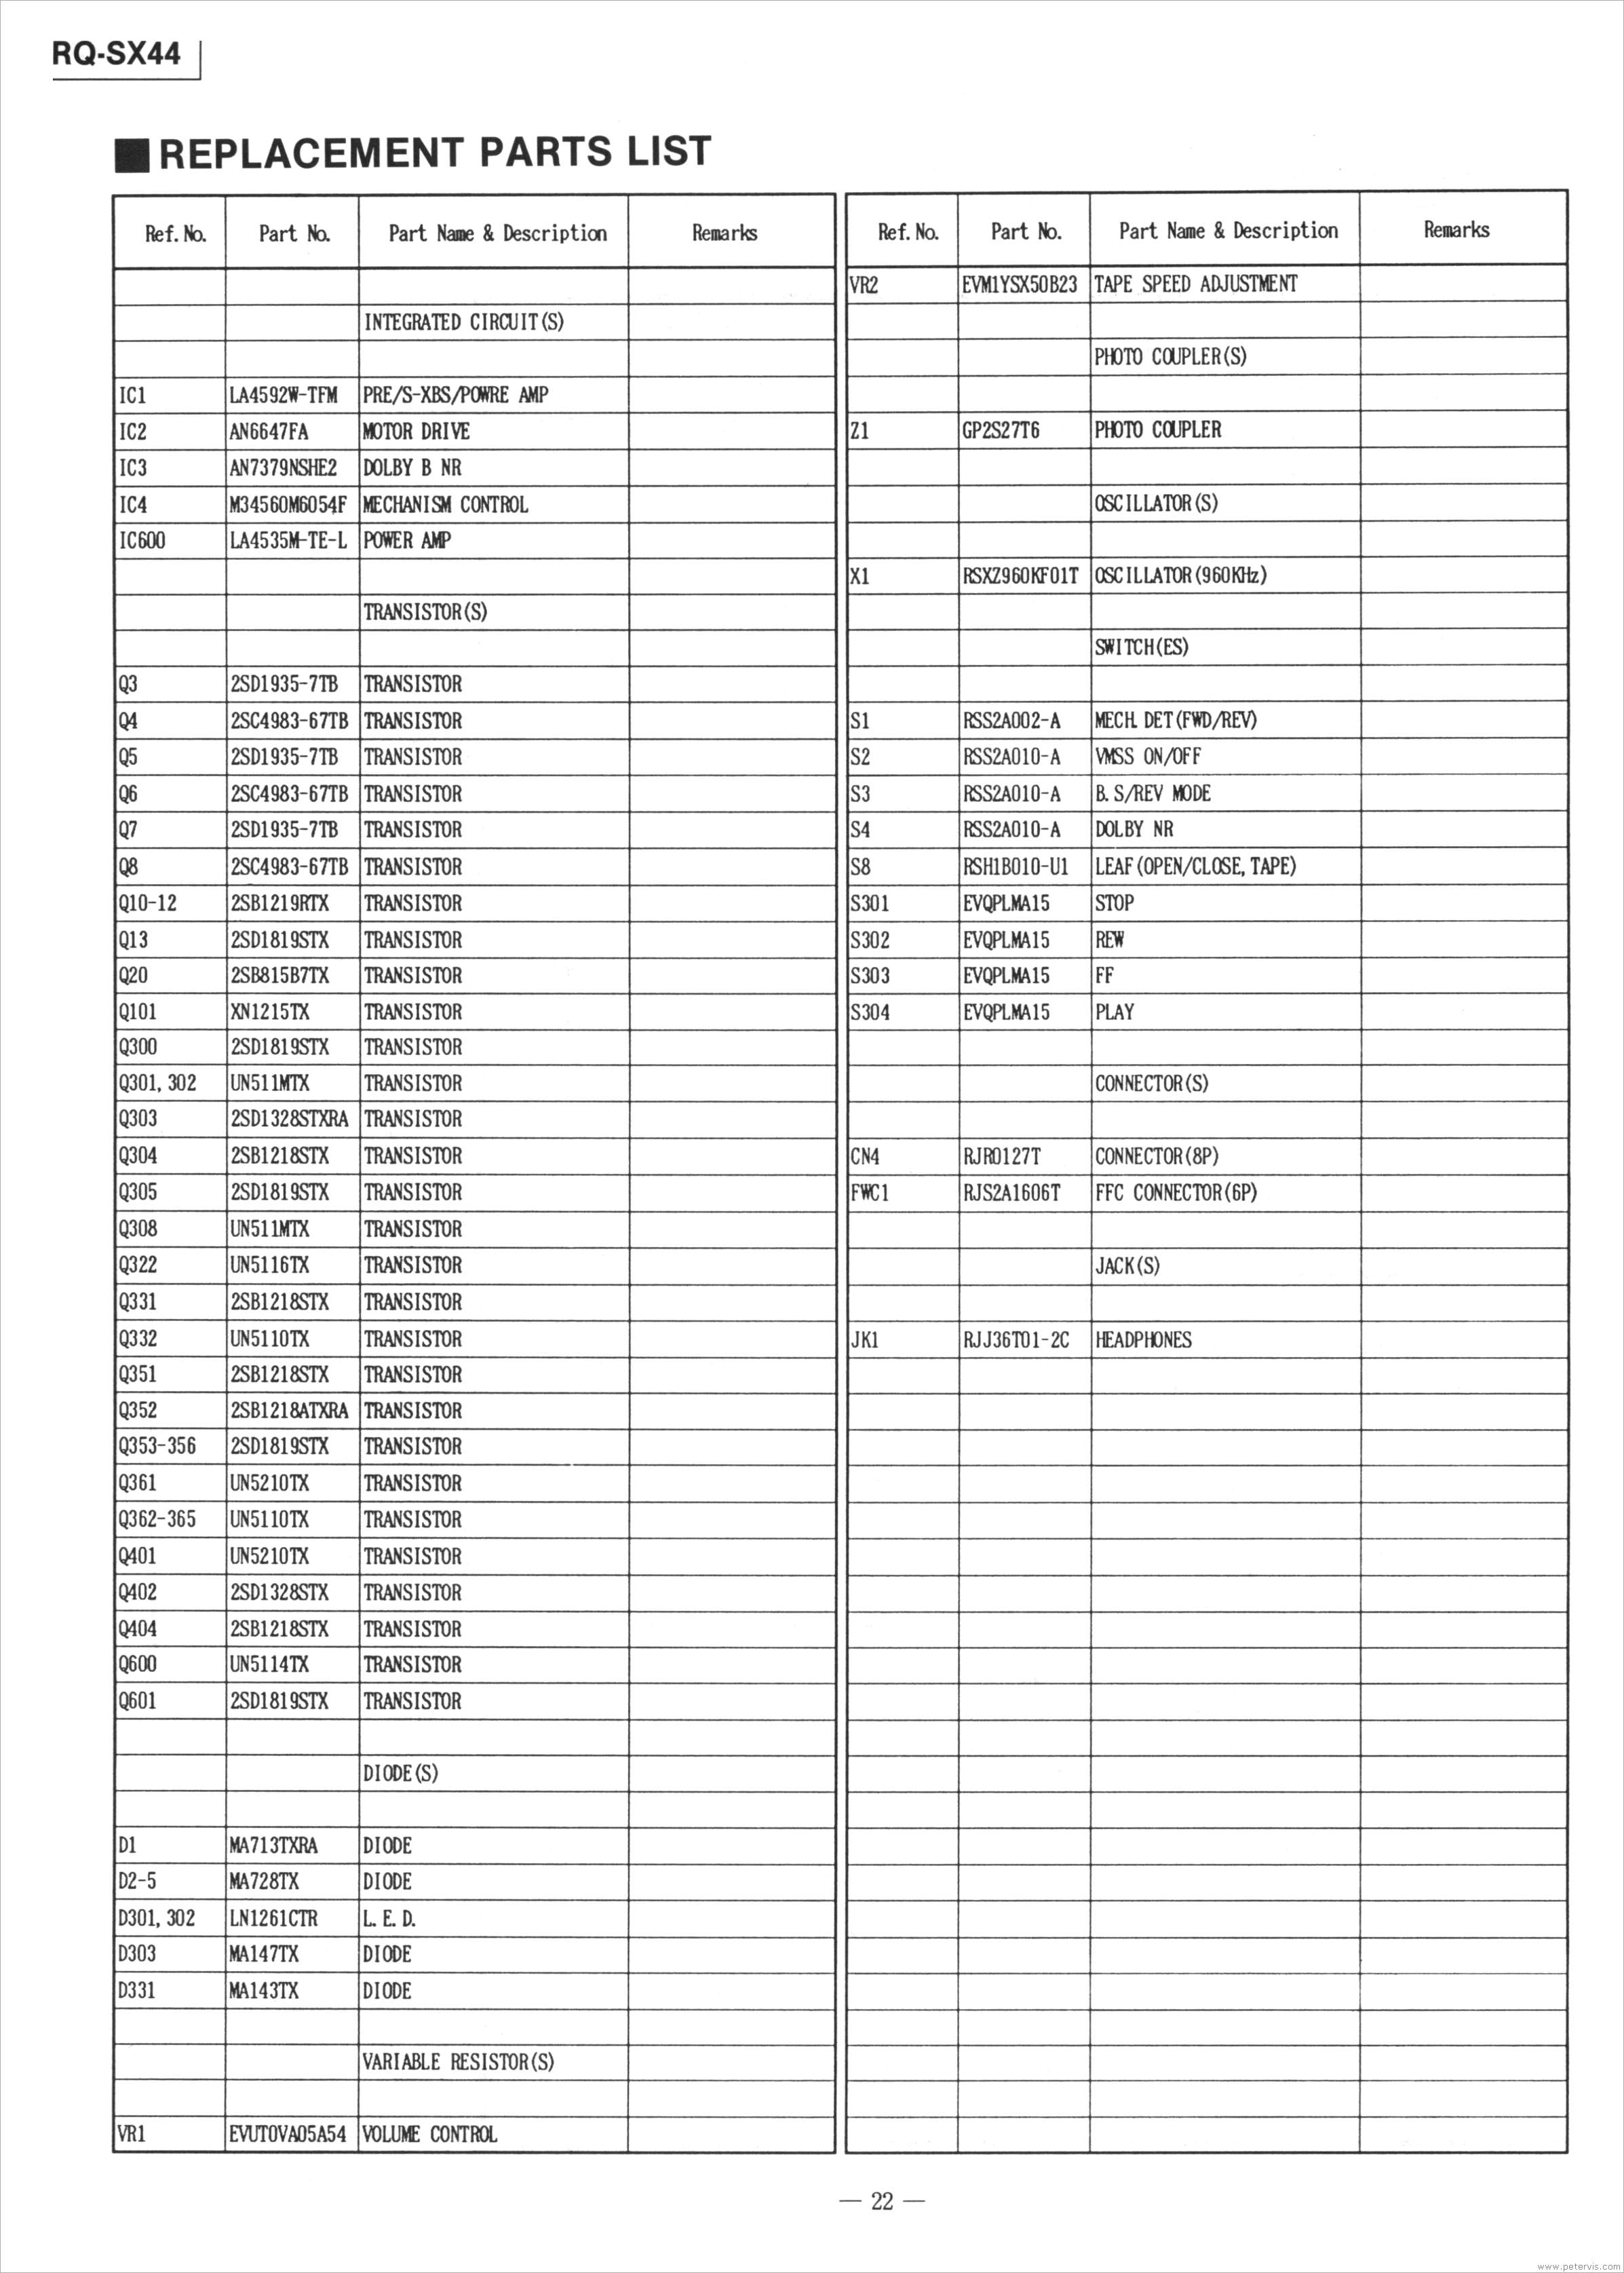 Replacement Parts List